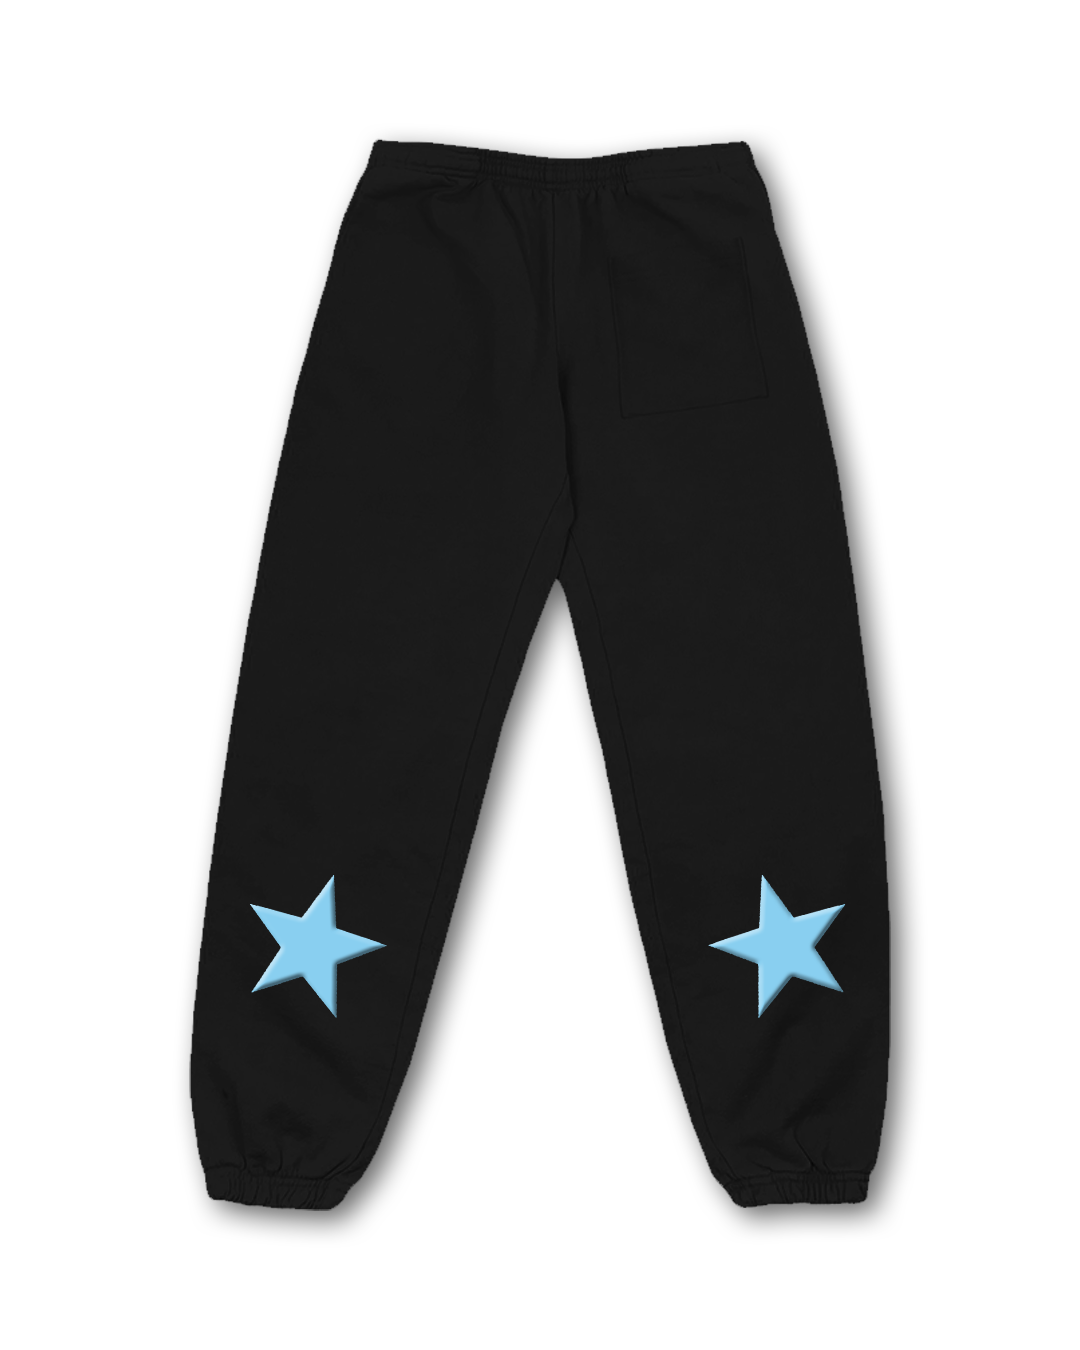 Oversized Black Sweatpants (Dreamer's Collection)